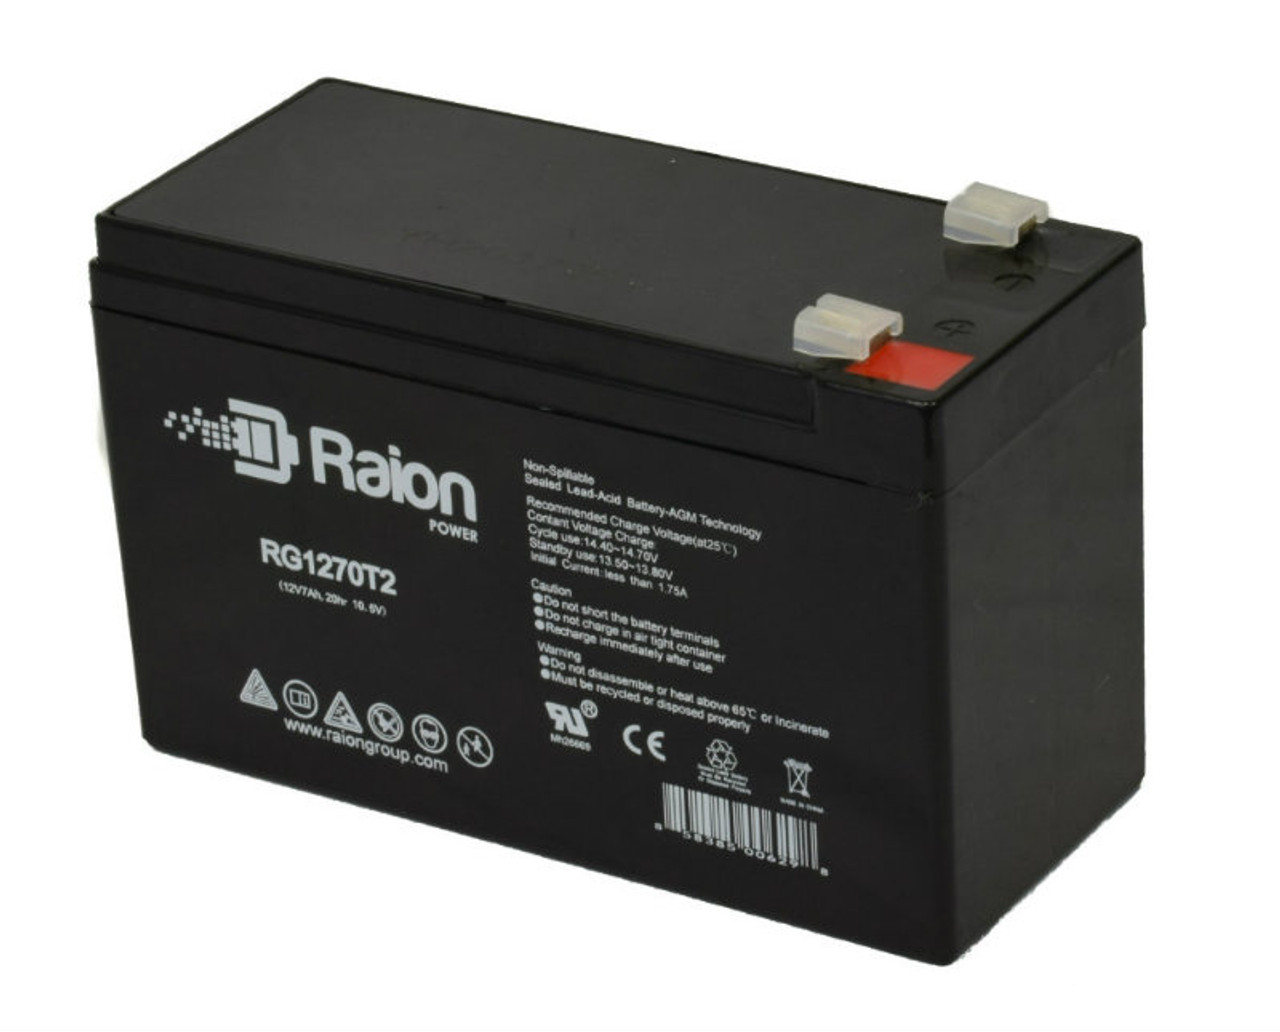 Raion Power Replacement 12V 7Ah Battery for Narco Narkomed Anesthesia 4 - 1 Pack